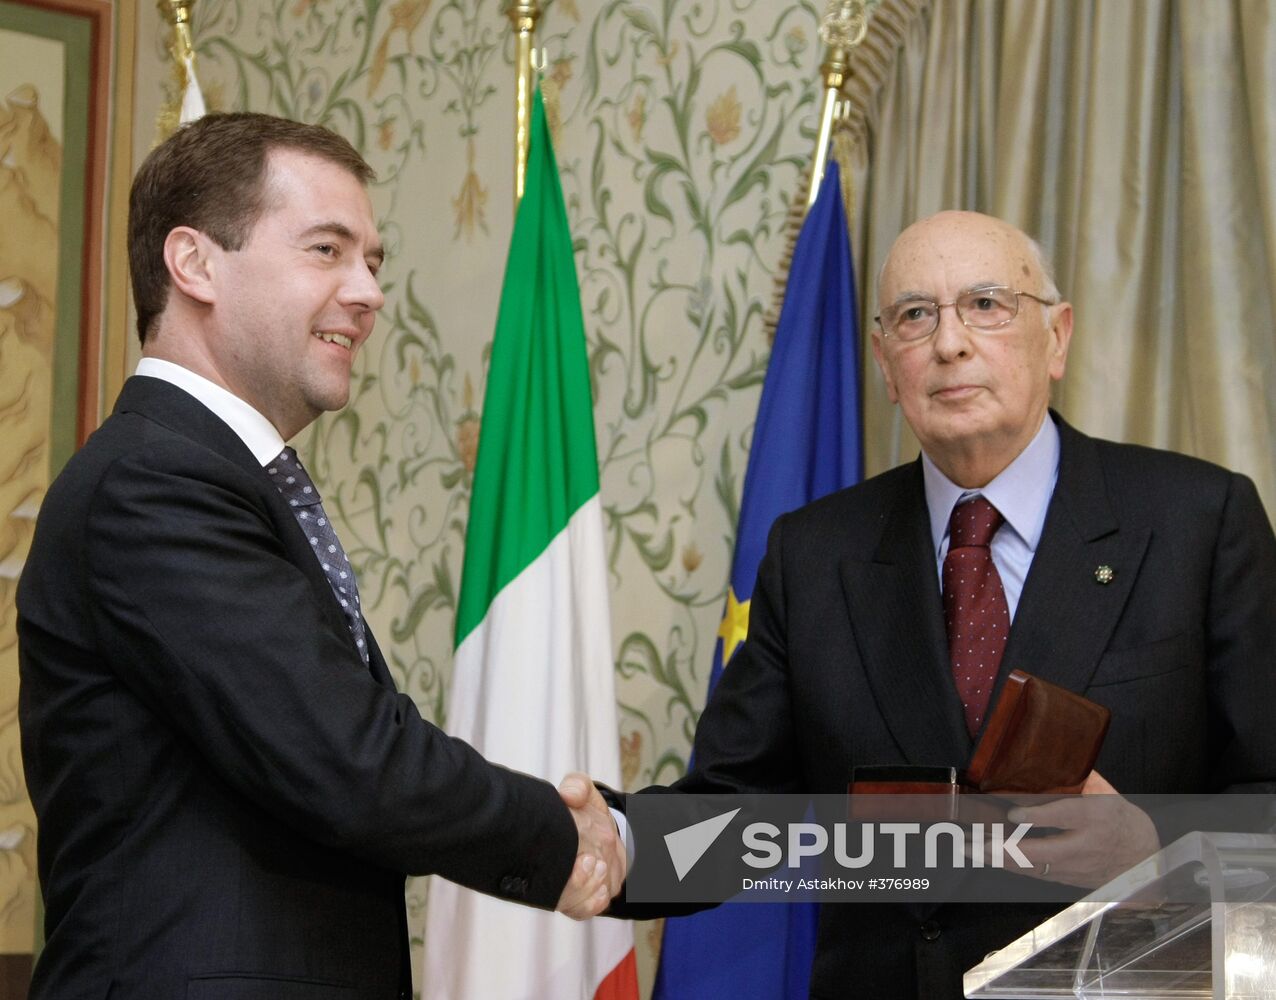 Medvedev’s working visit to Italy